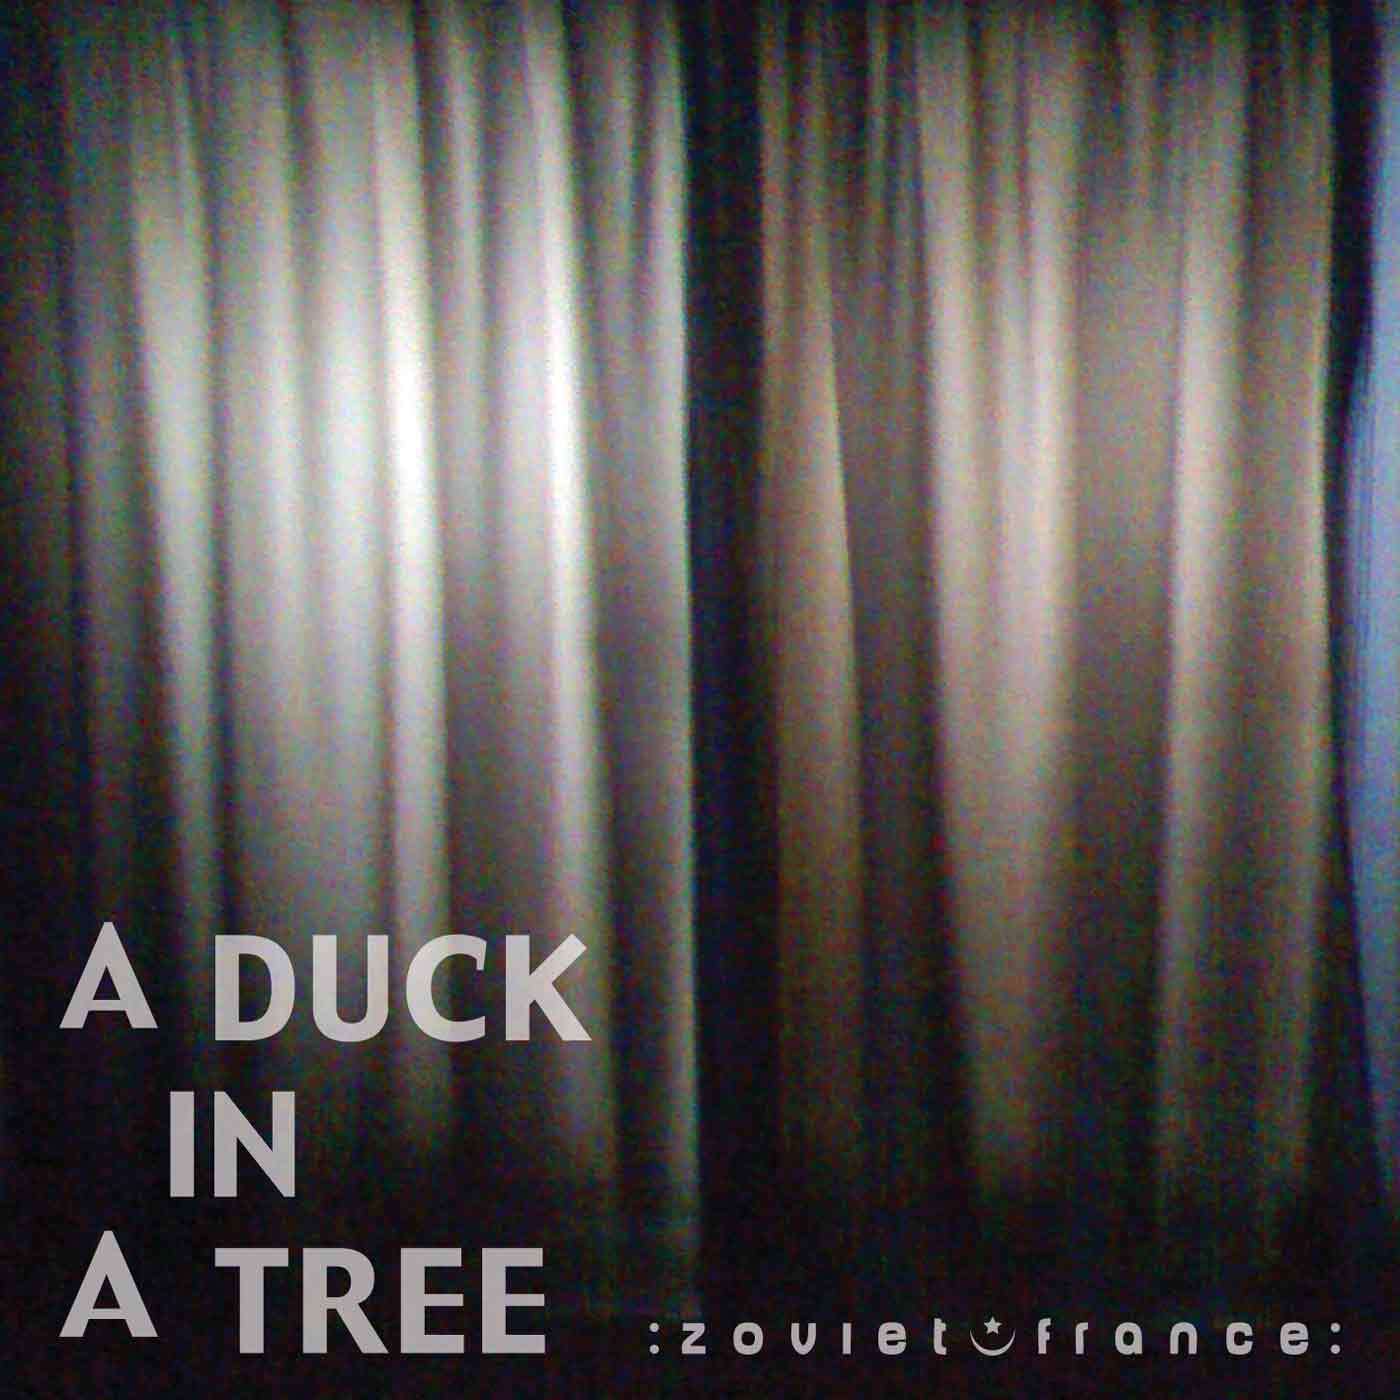 A-Duck-in-a-Tree-2013-05-11-_-Exposessed-layout-1400.jpg